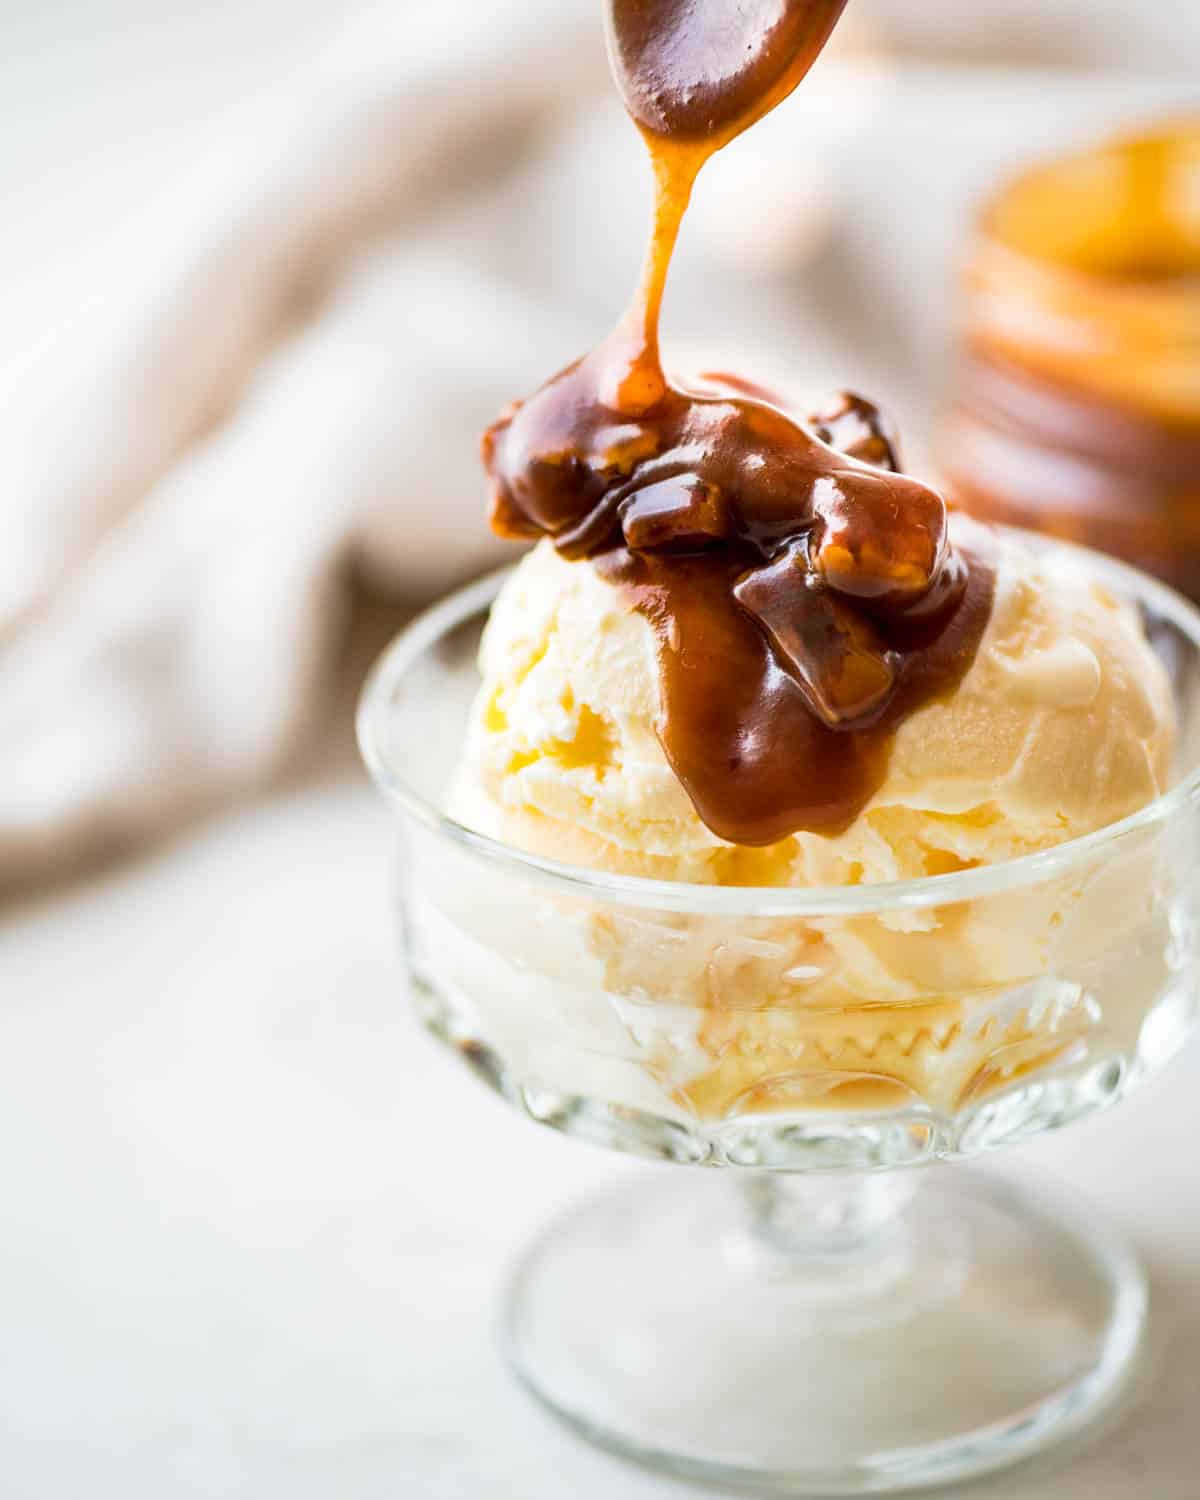 Drizzling Pecan Caramel sauce over a dish of ice cream.